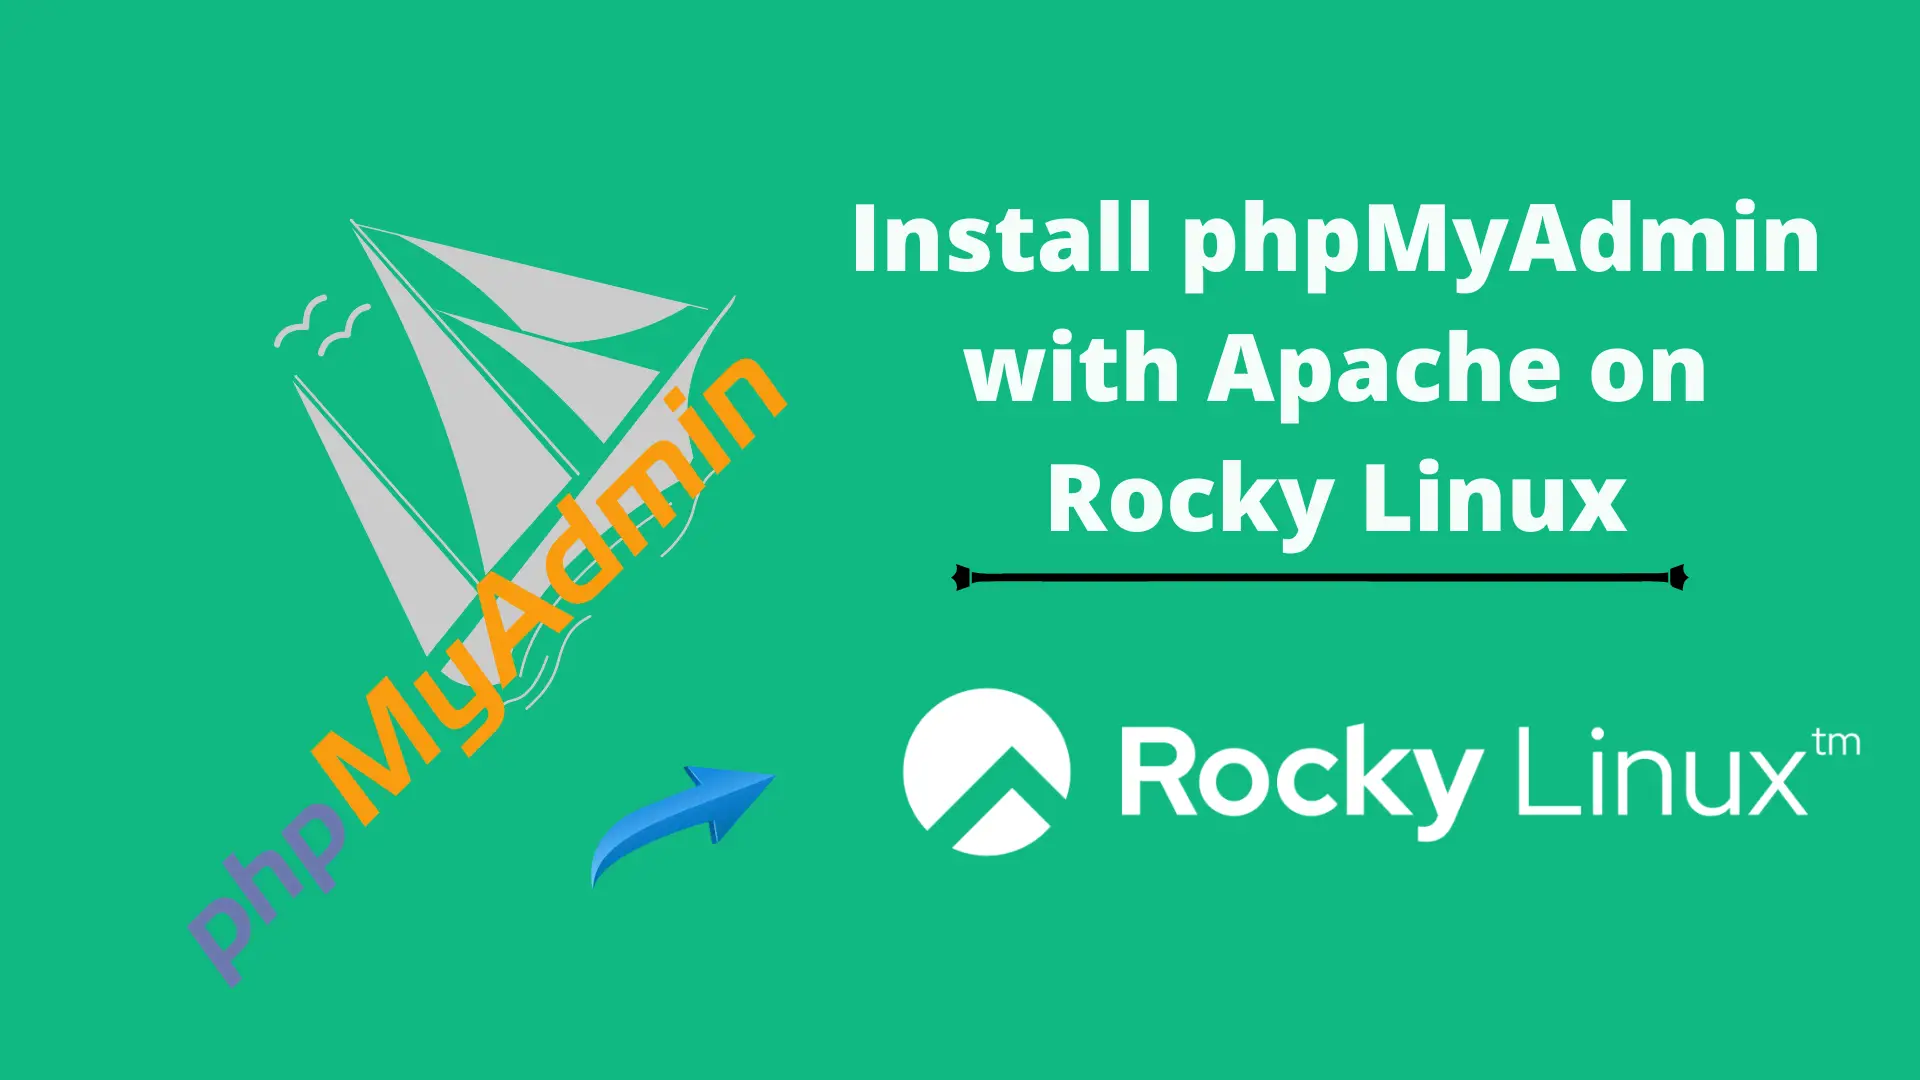 Install phpMyAdmin with Apache on Rocky Linux